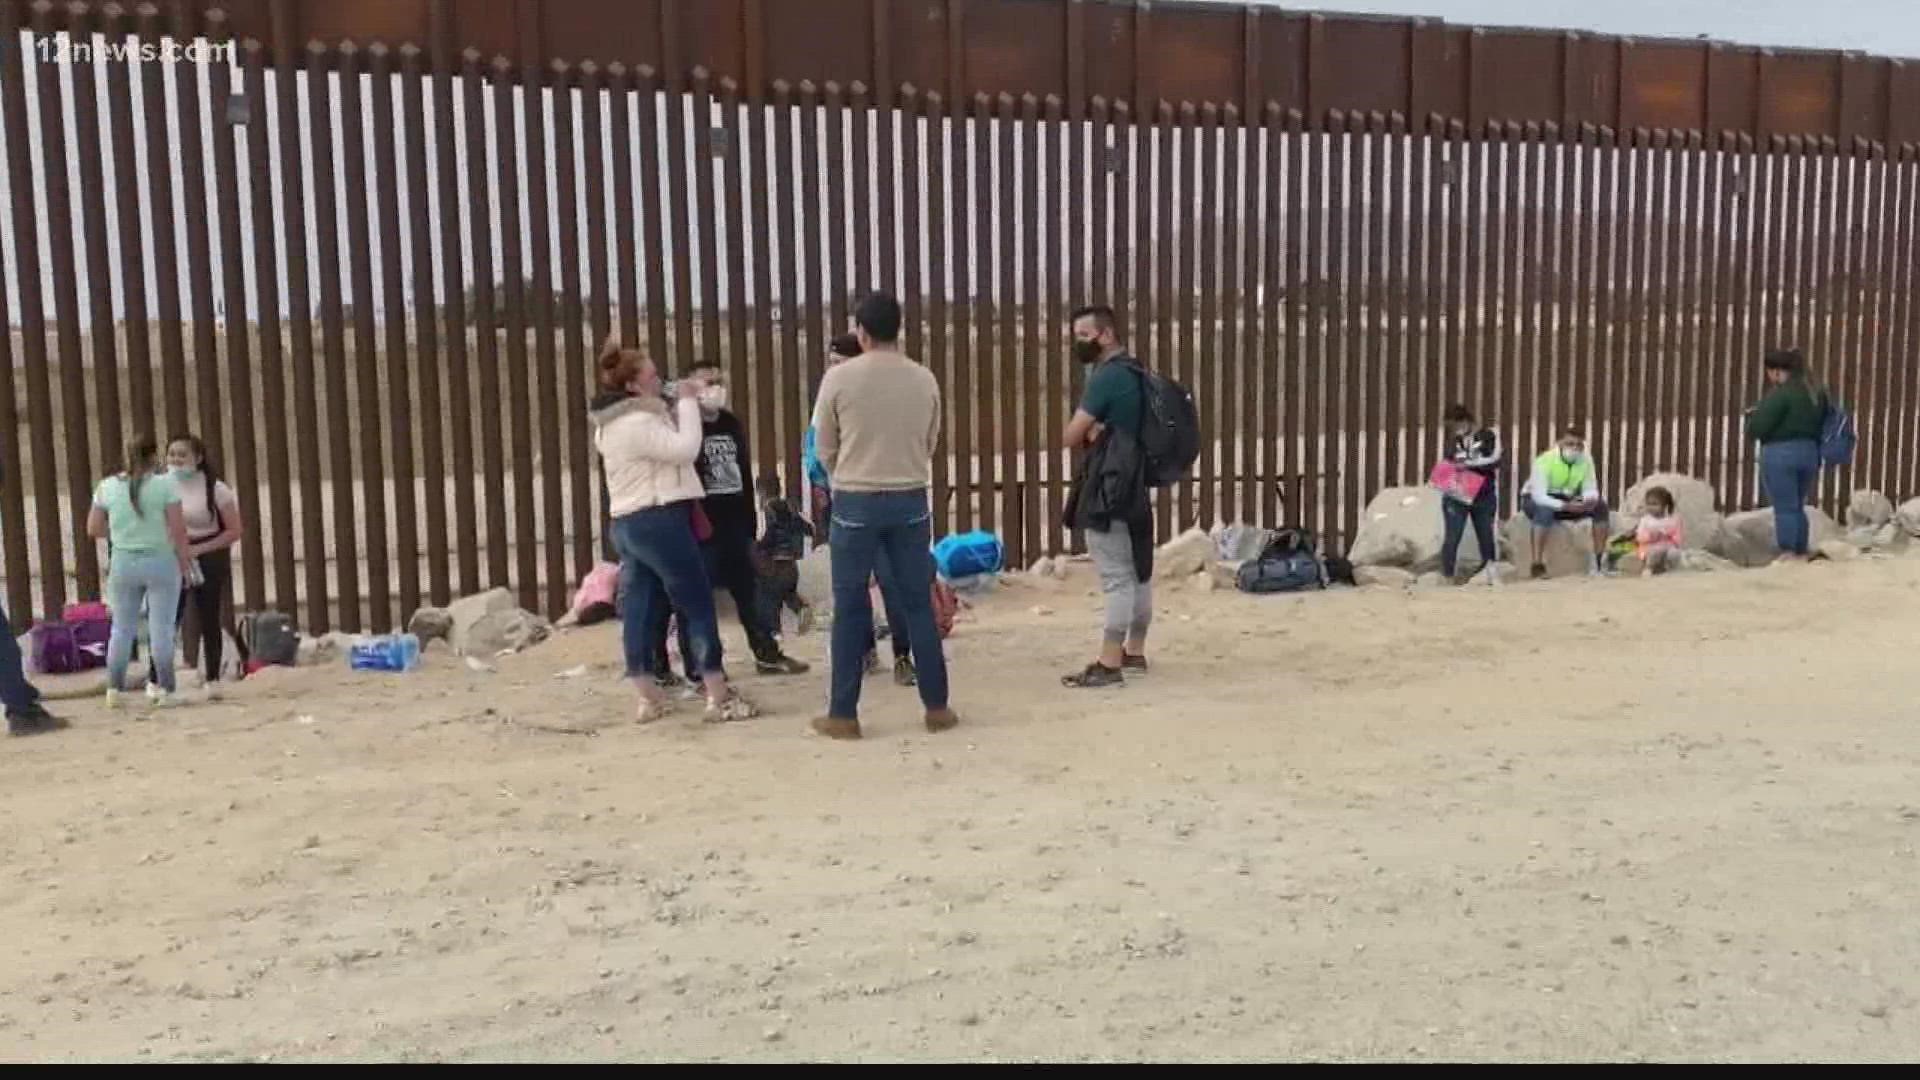 Video of migrants crossing the U.S.-Mexico border during Governor Doug Ducey's press conference in Yuma on Tuesday wasn't necessarily a surprise.